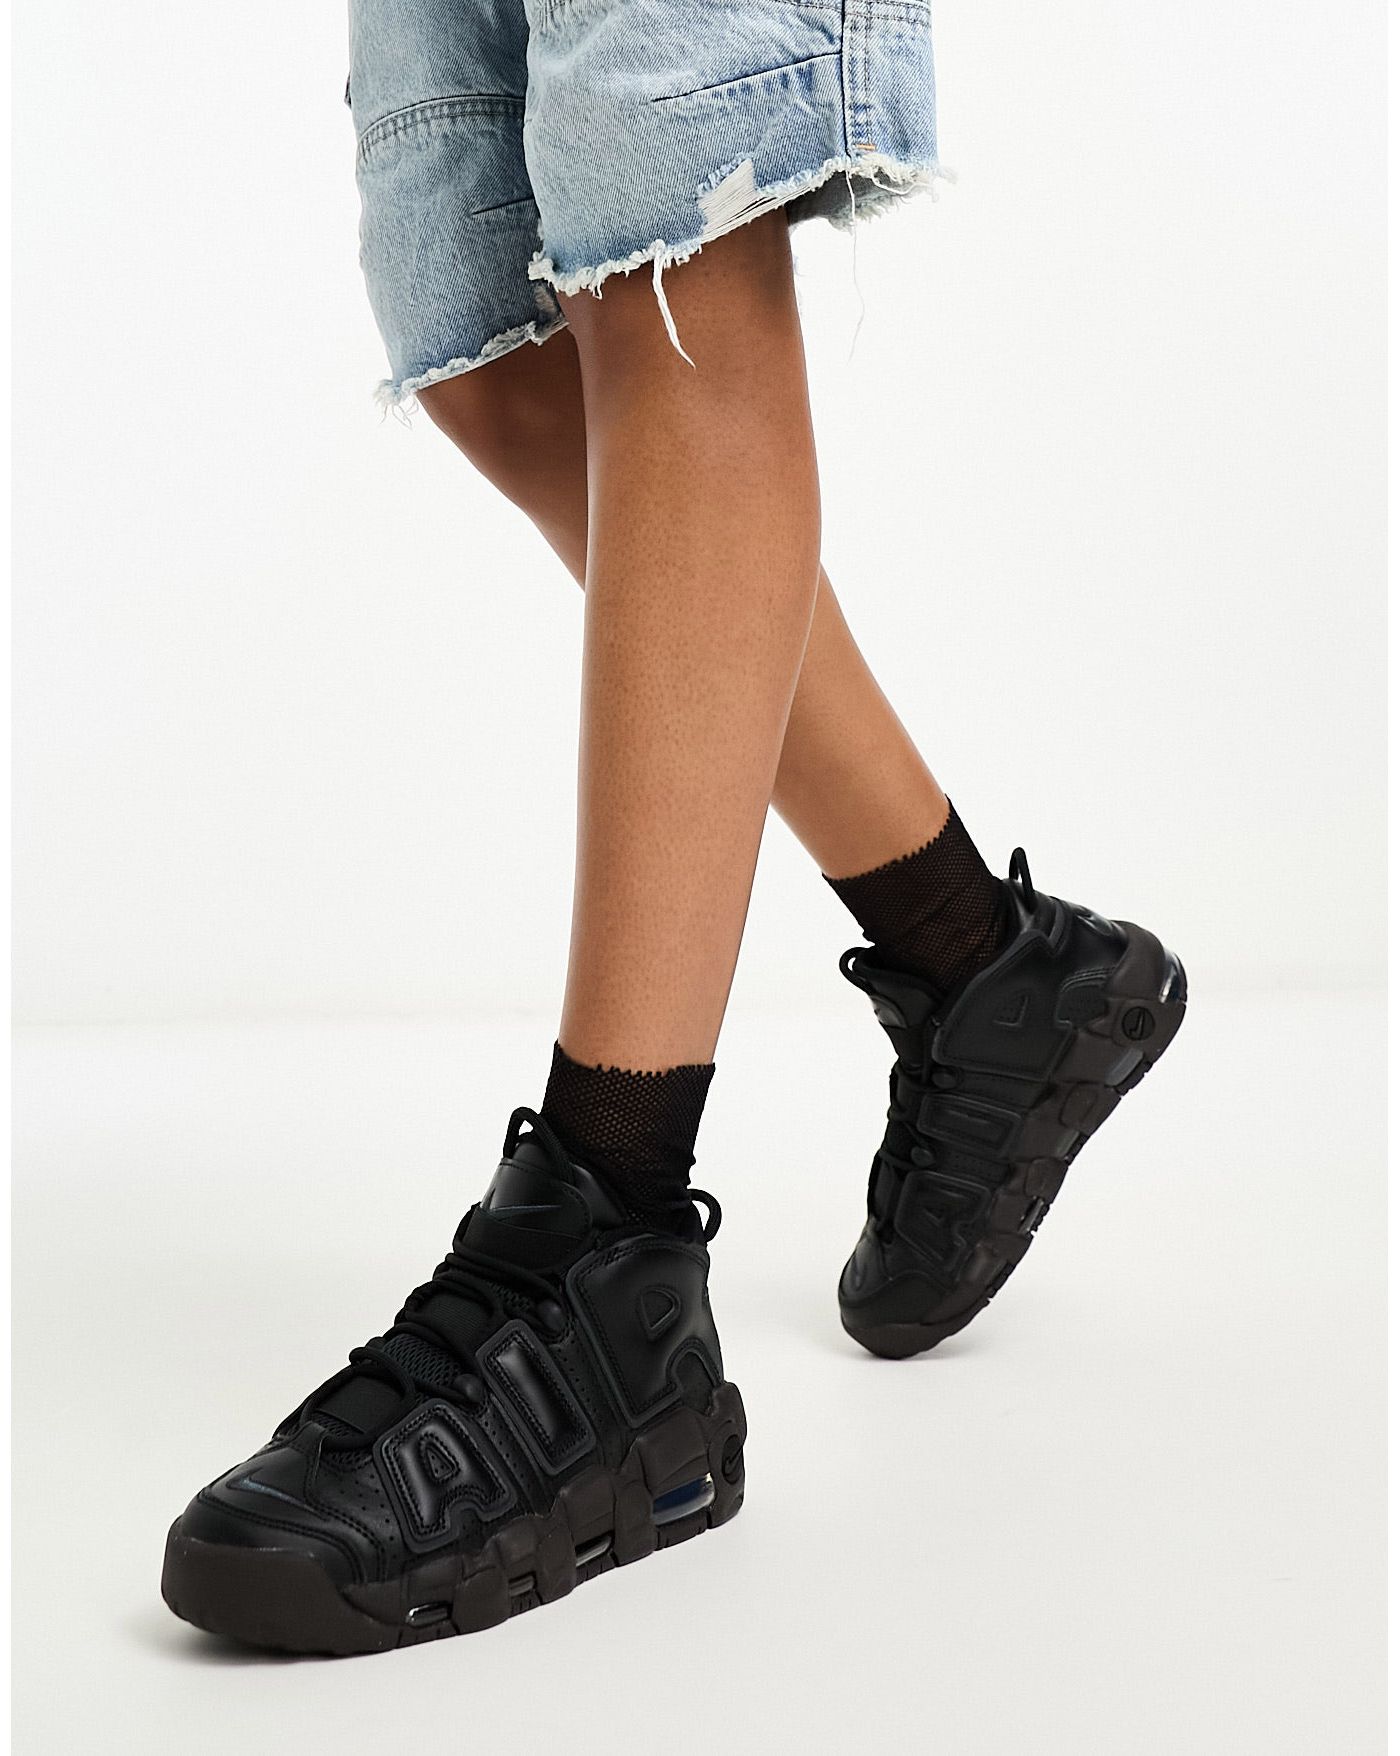 Nike Air More Uptempo trainers in triple black